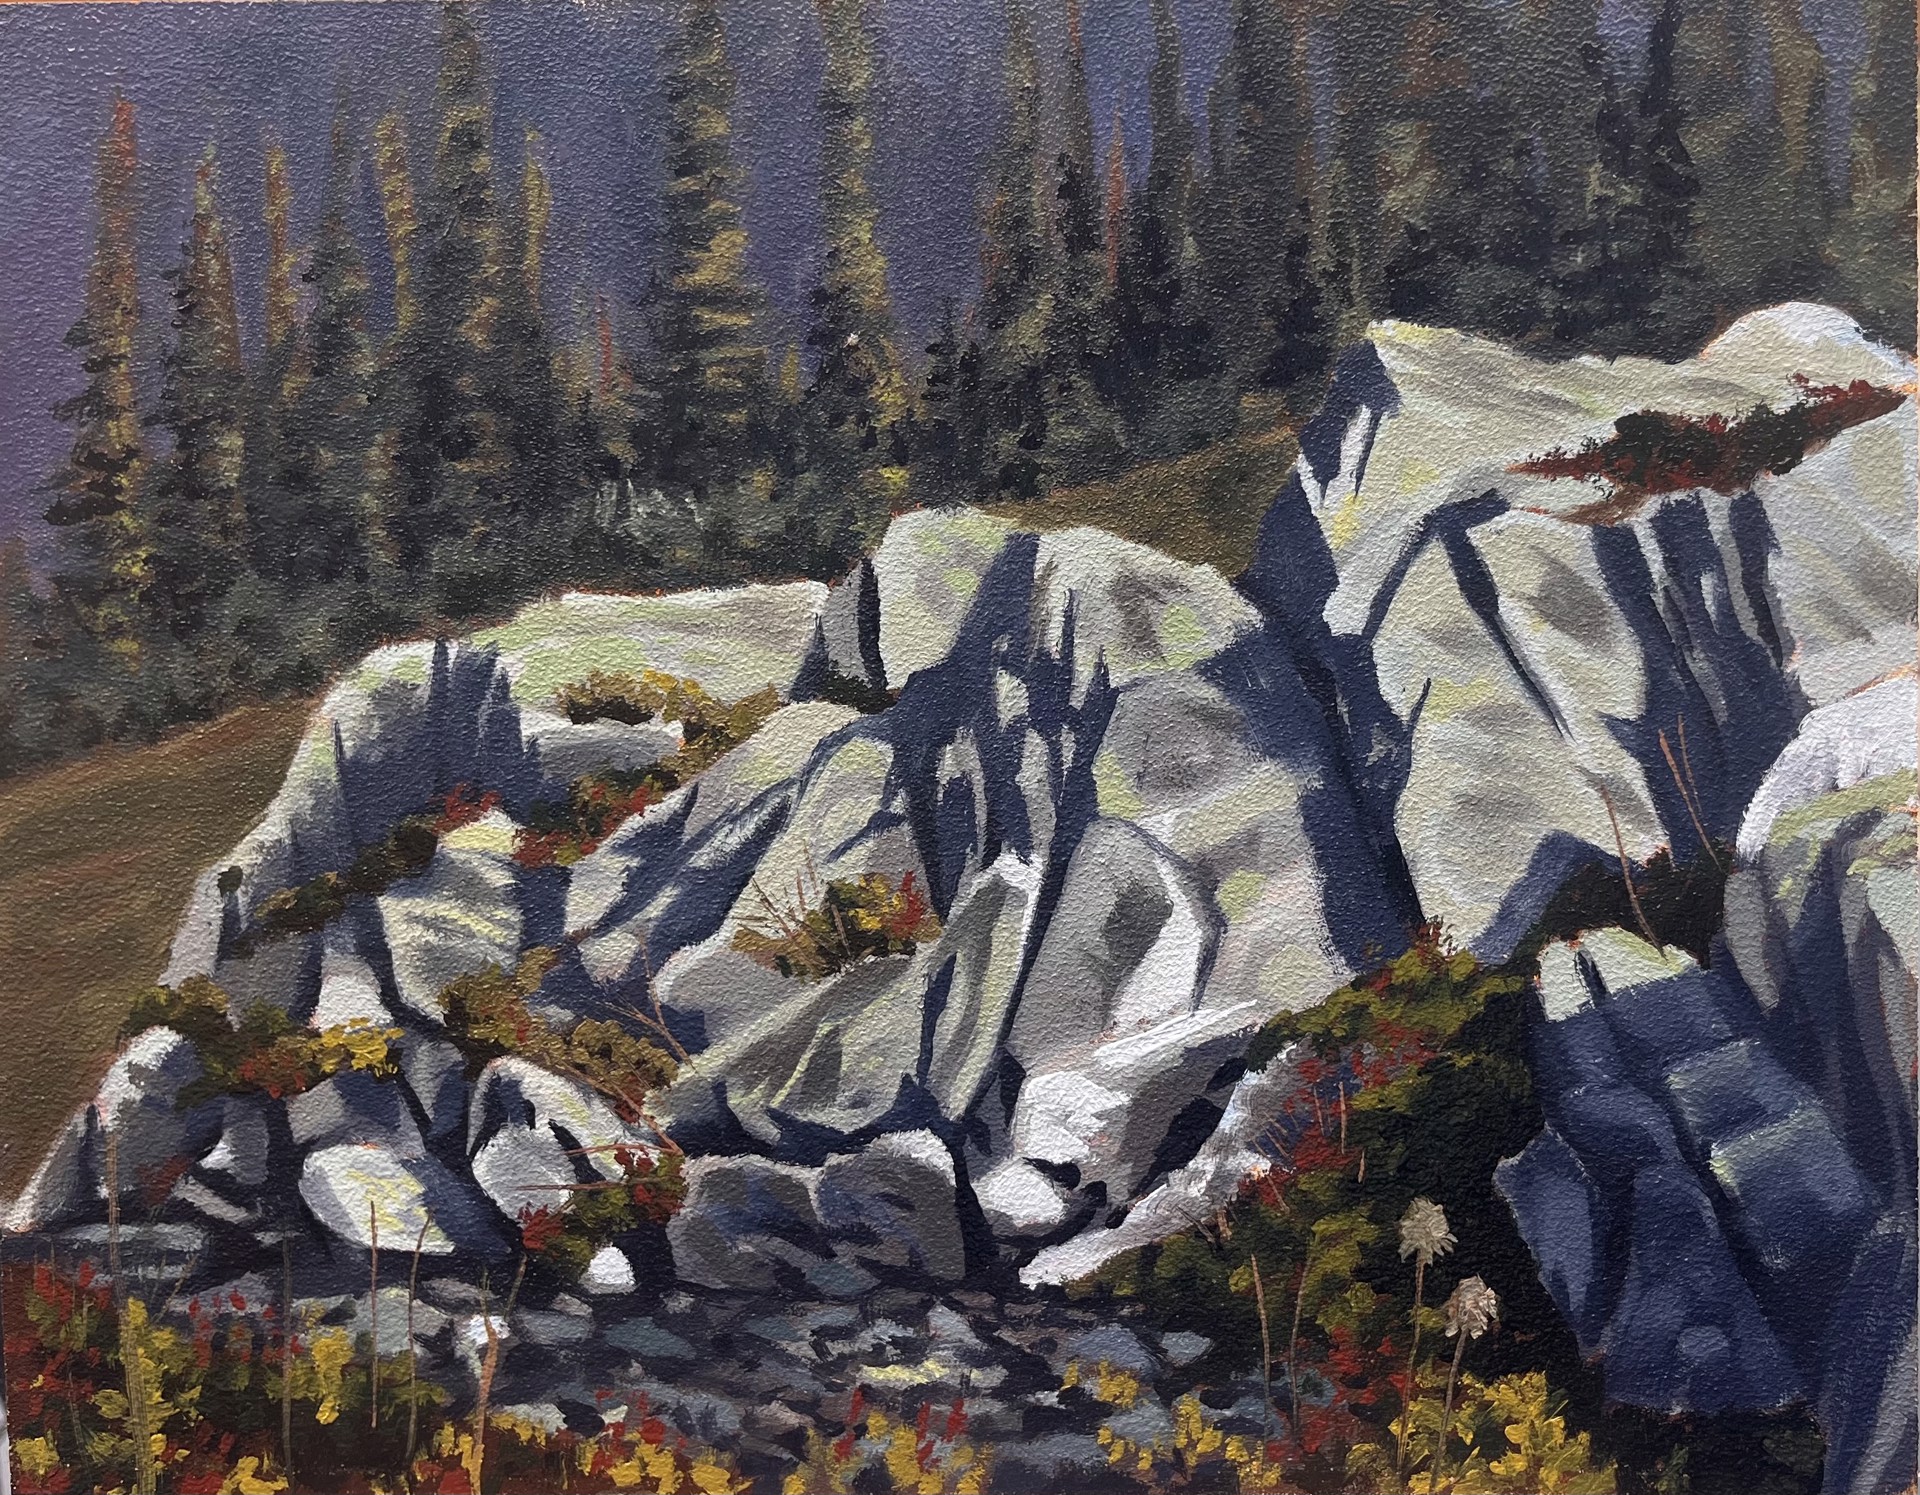 Plein Air Study - From the Lodge by Marcos Molina